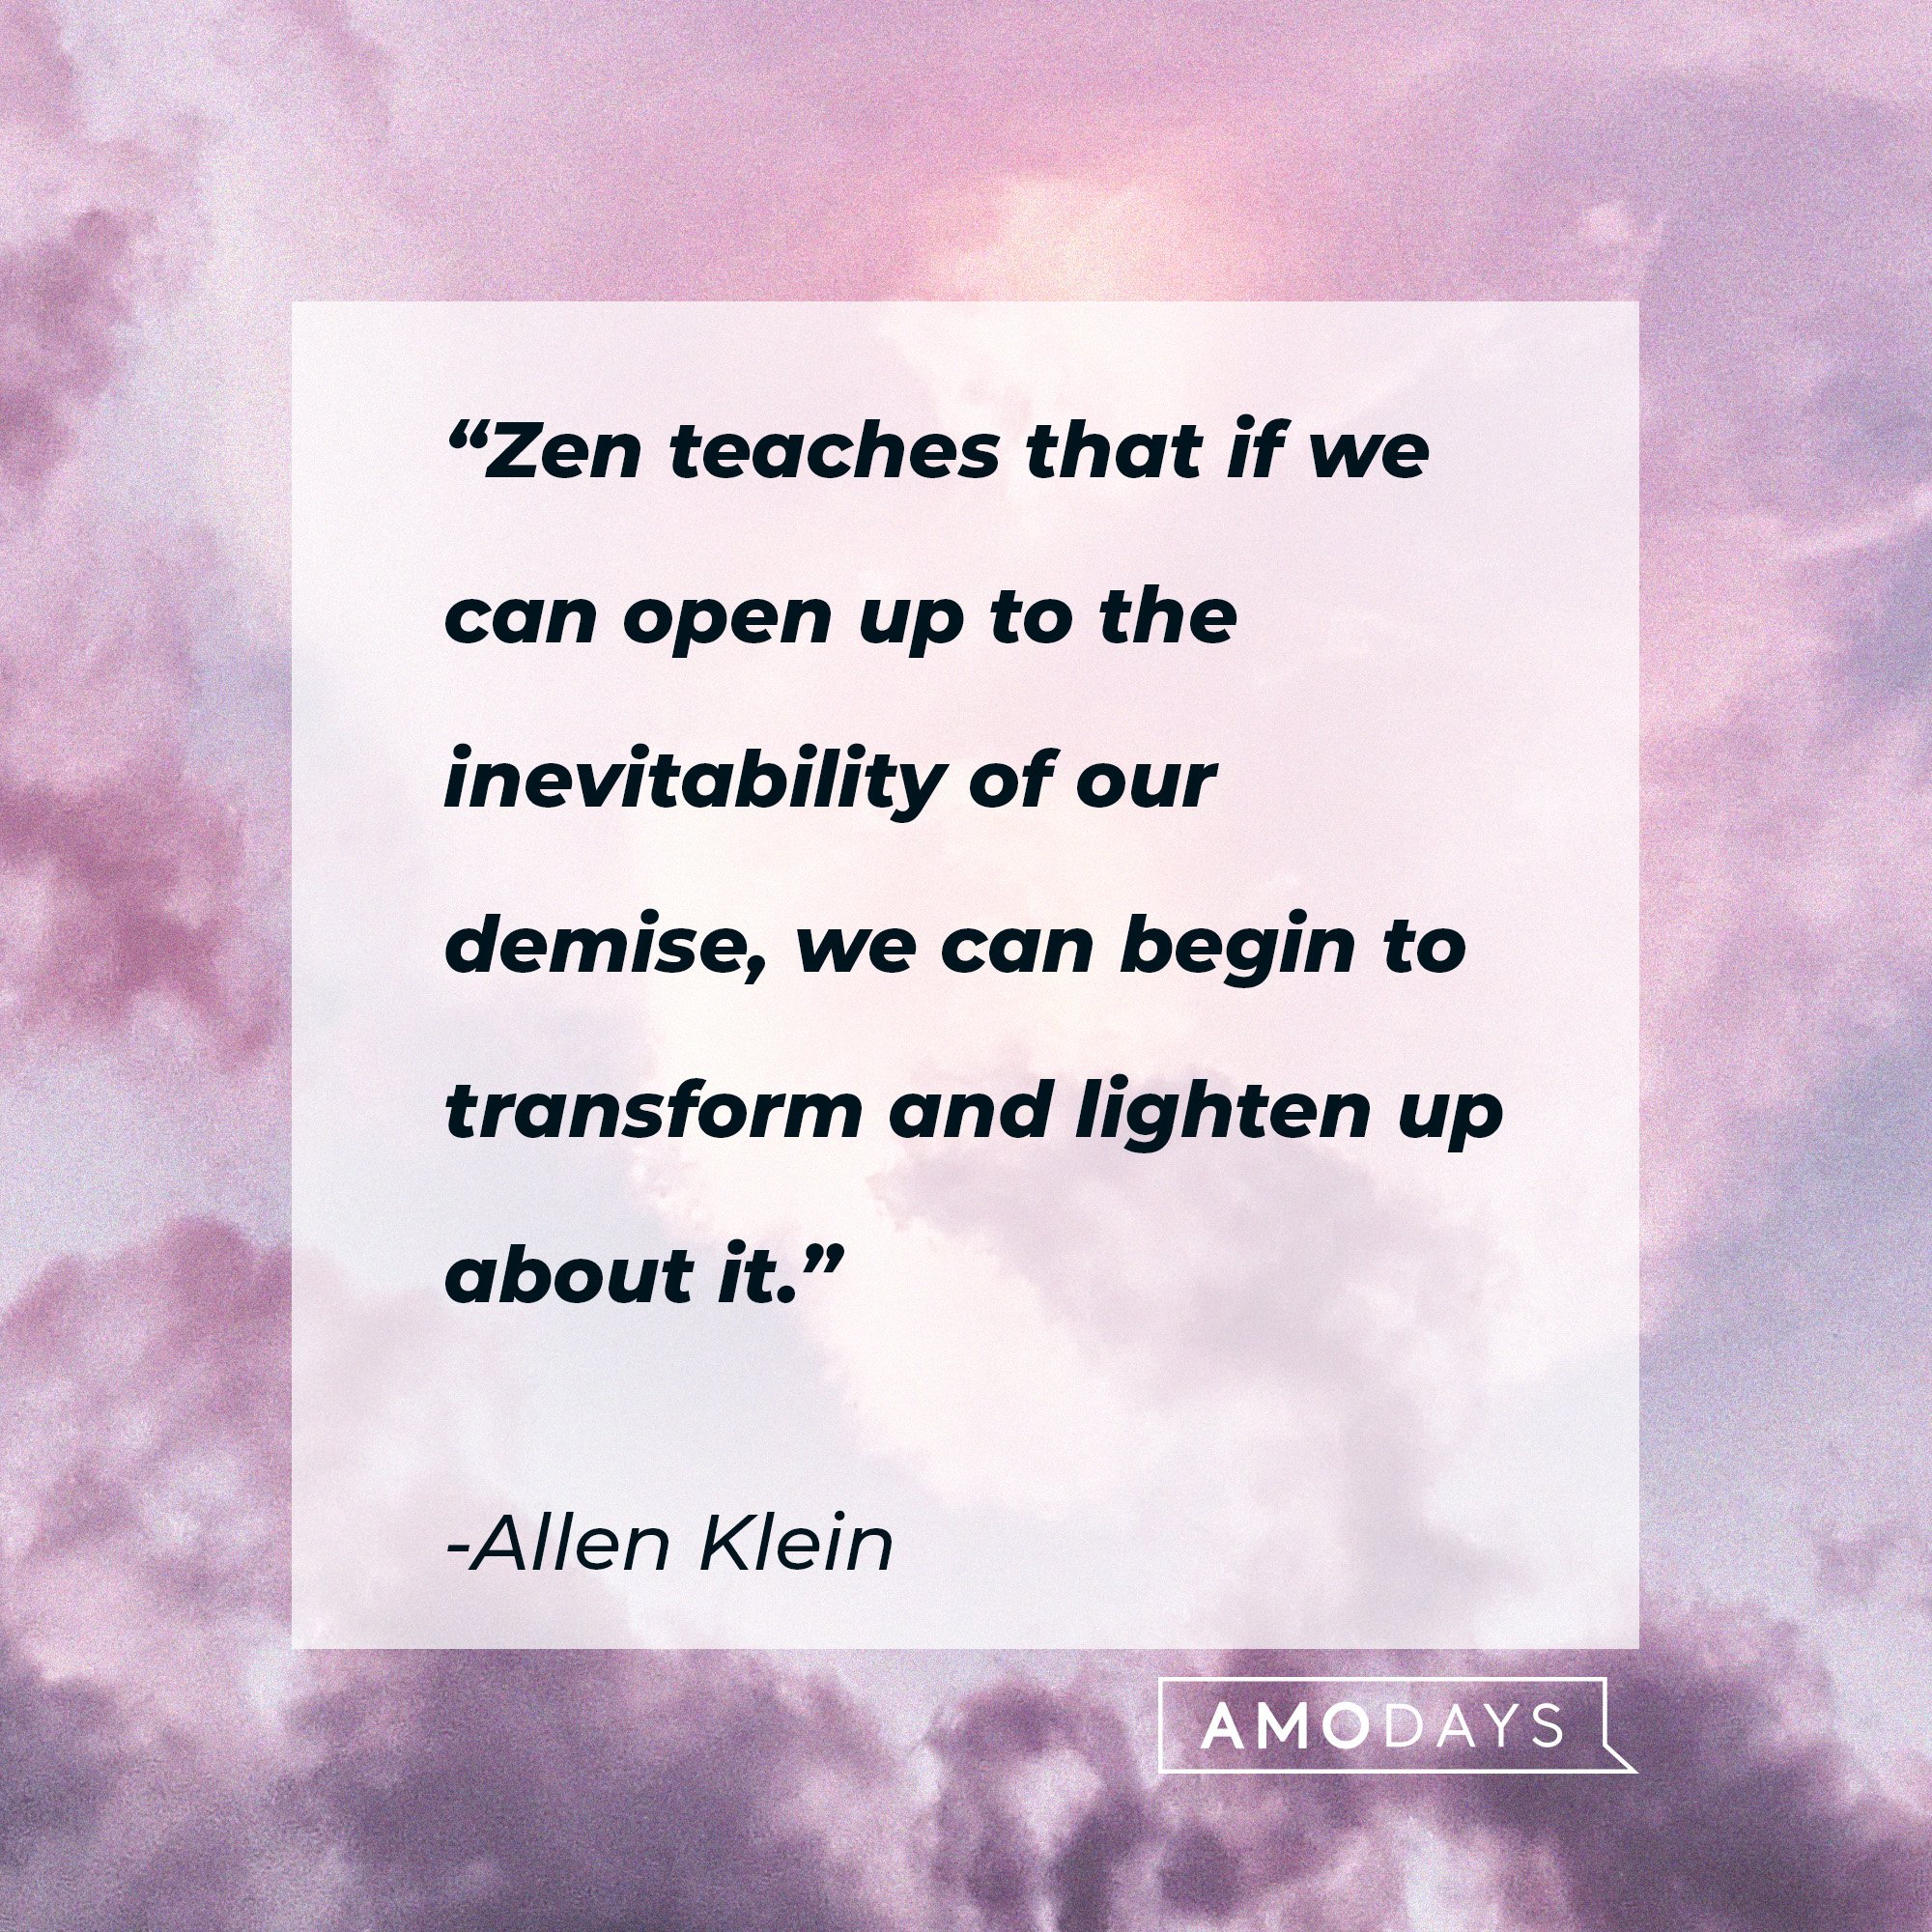  Allen Klein's quote: “Zen teaches that if we can open up to the inevitability of our demise, we can begin to transform and lighten up about it.” | Image: AmoDays